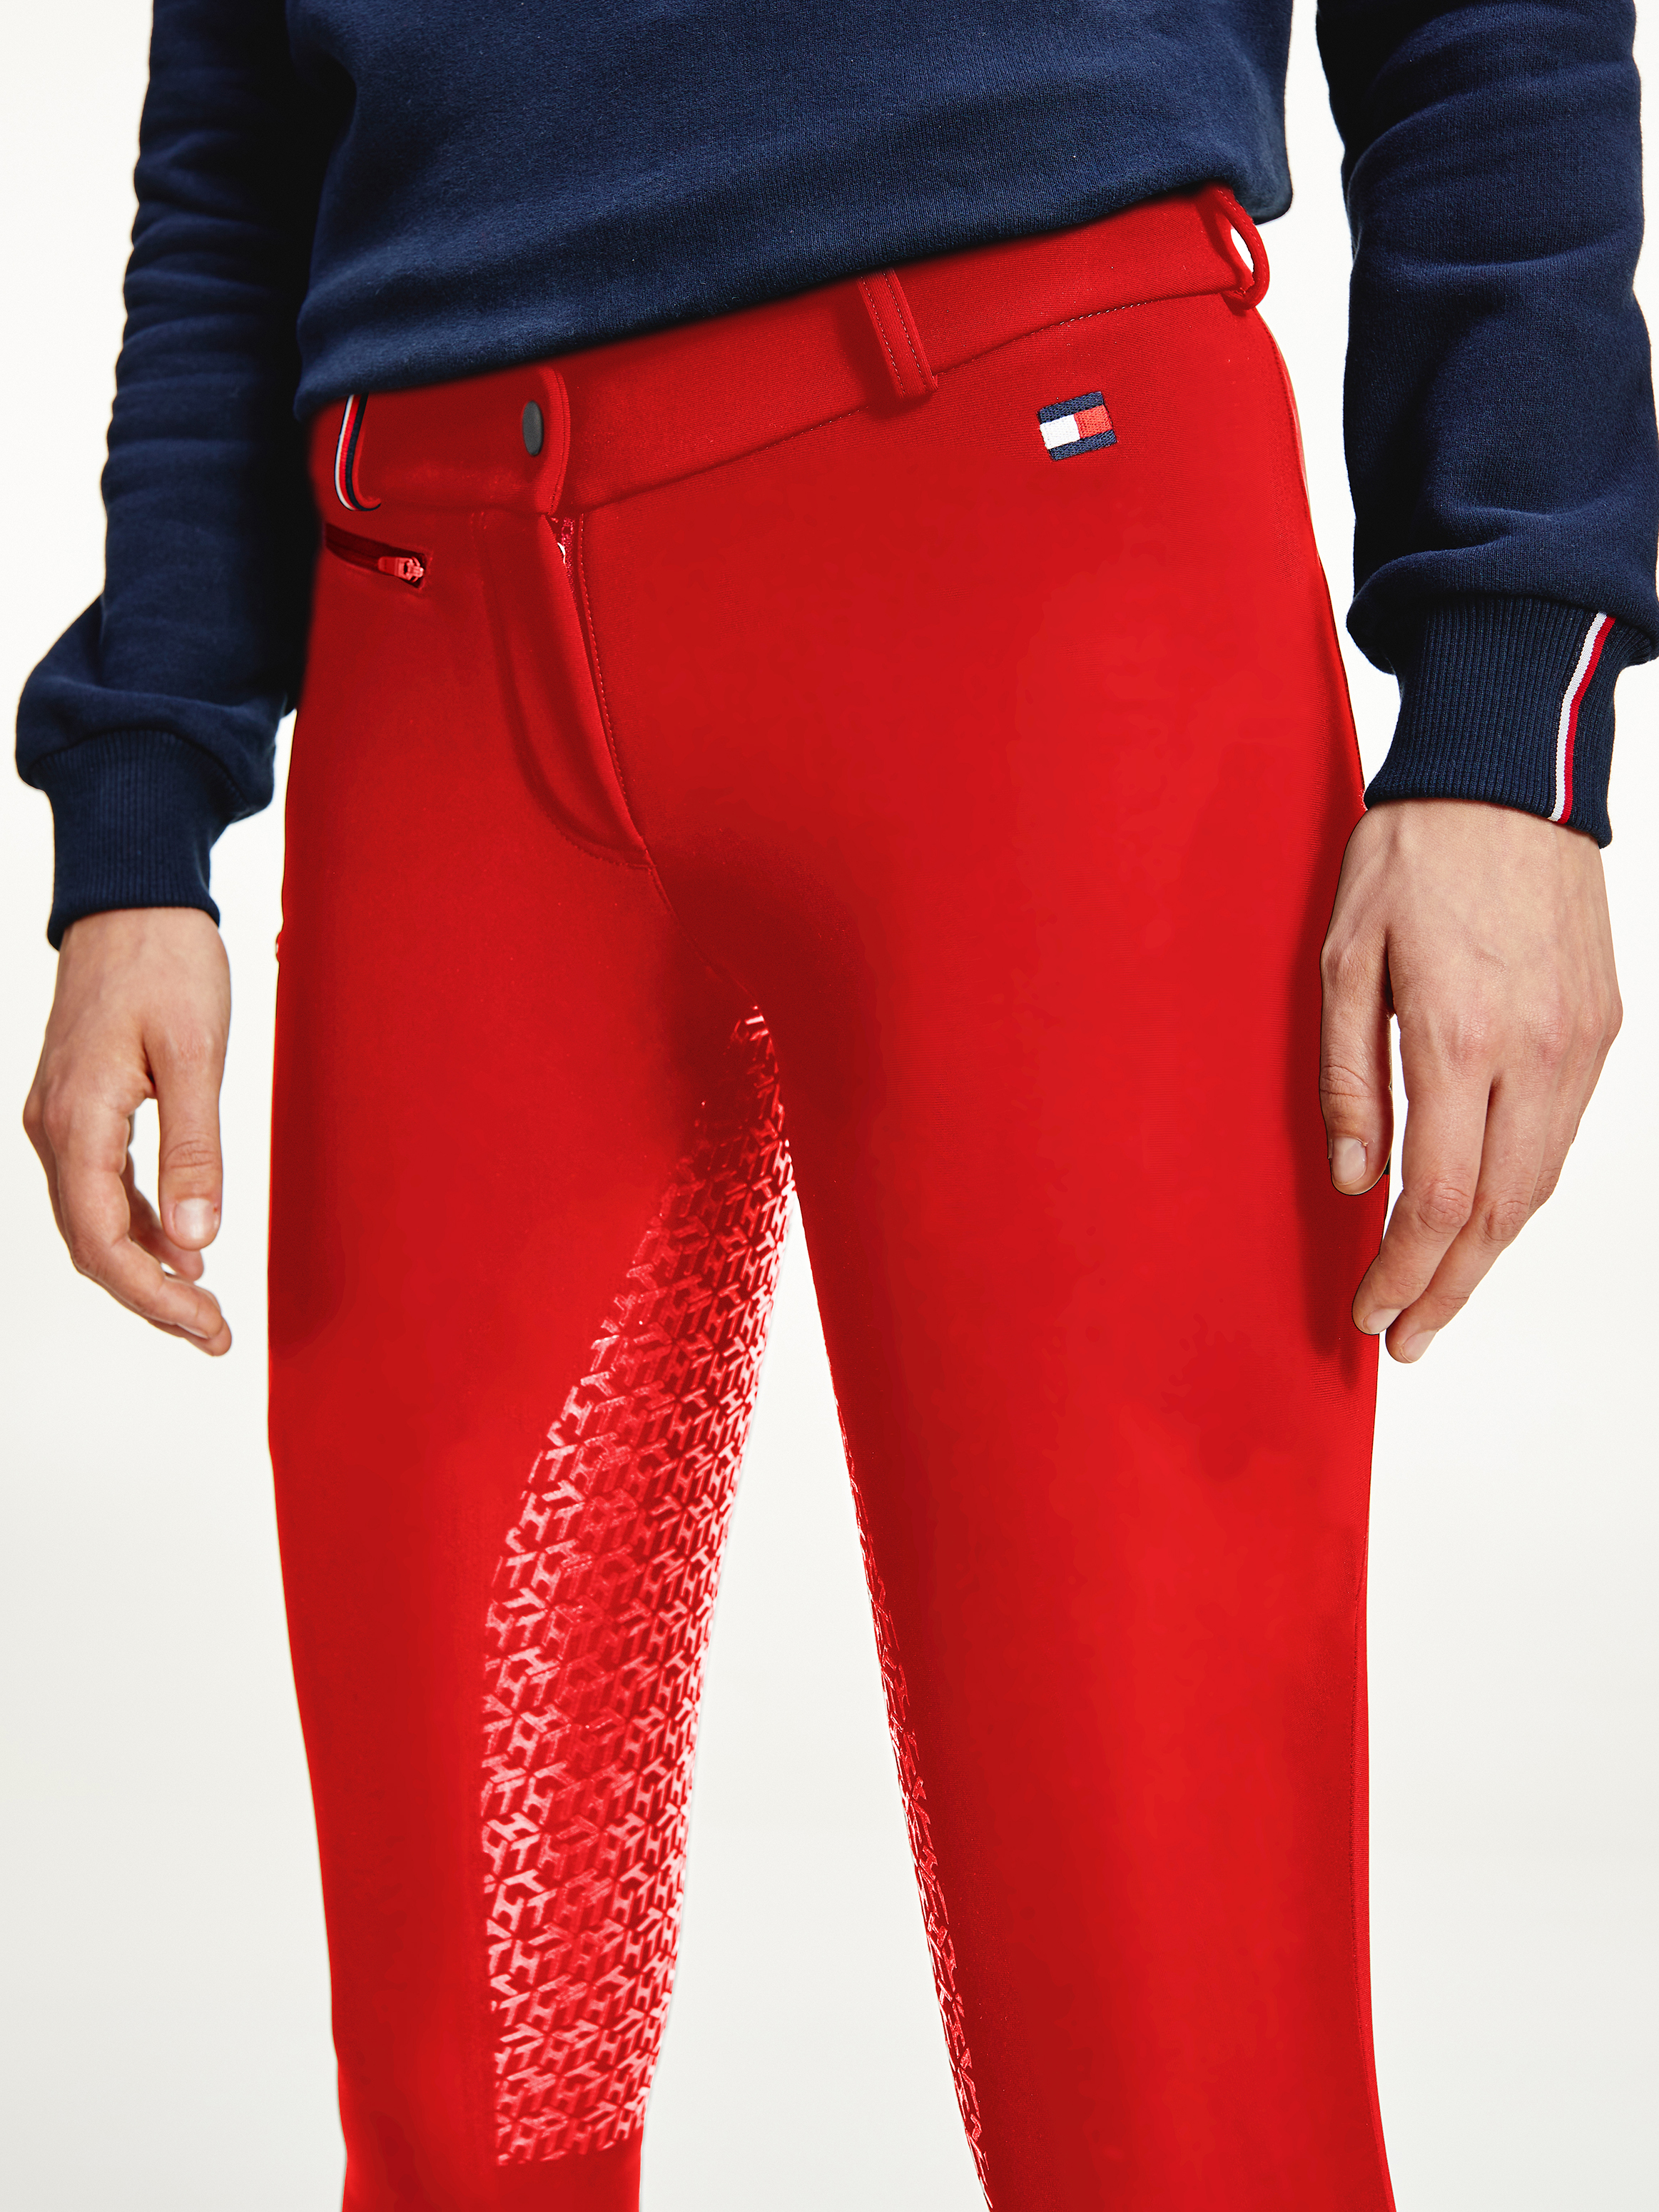 Winter-Reithose Damen Performance Softshell Full Grip Primary Red Tommy Hilfiger